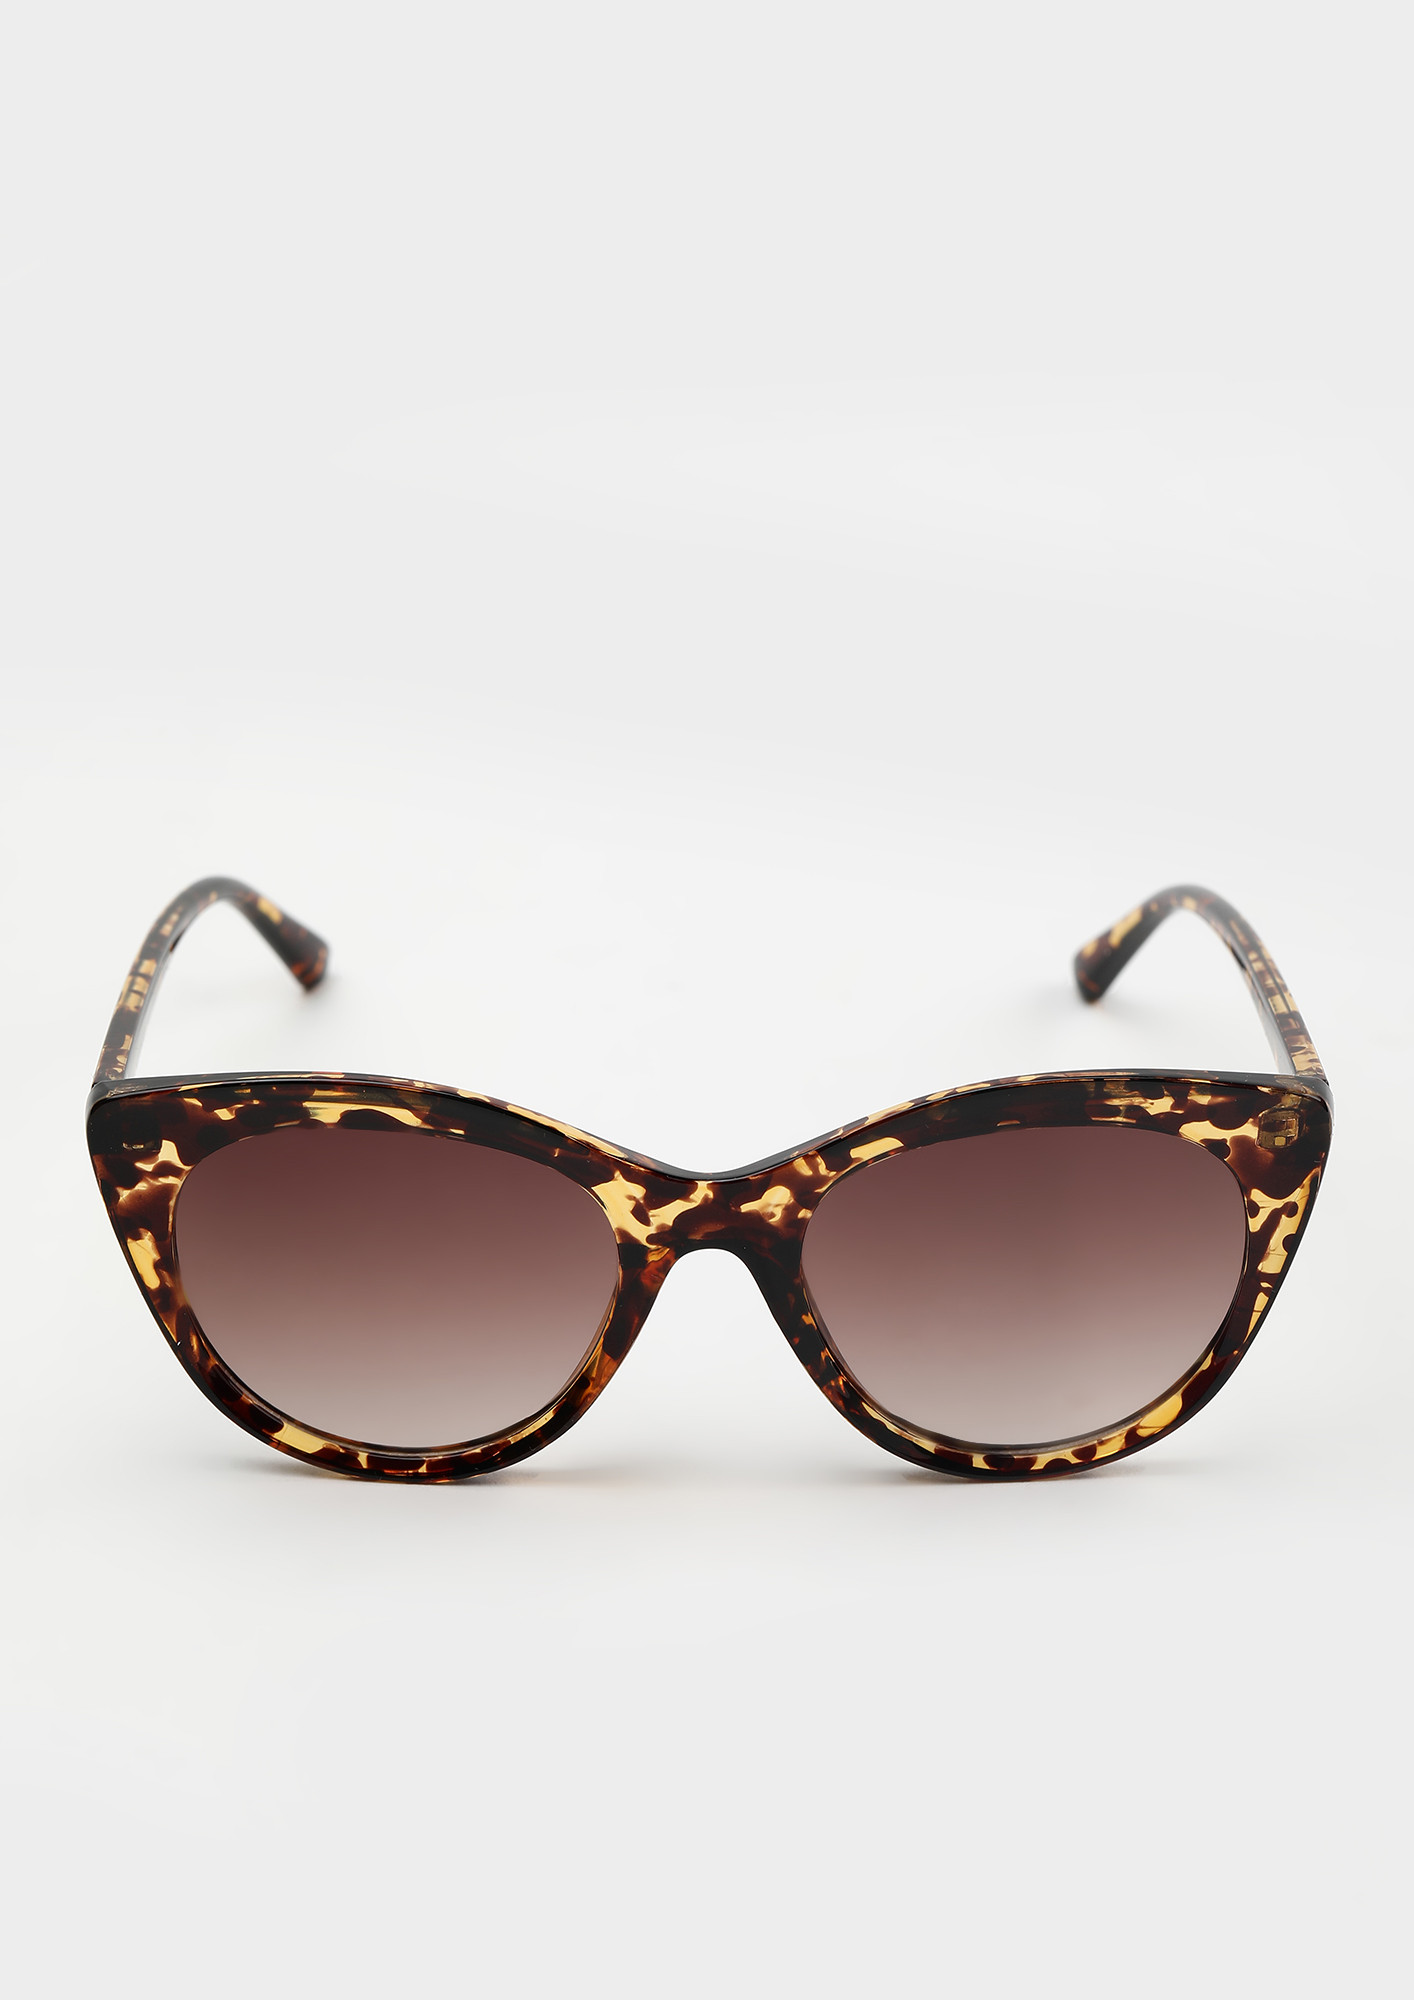 IN A SAFE SHELL AMBER CATEYE SUNGLASSES